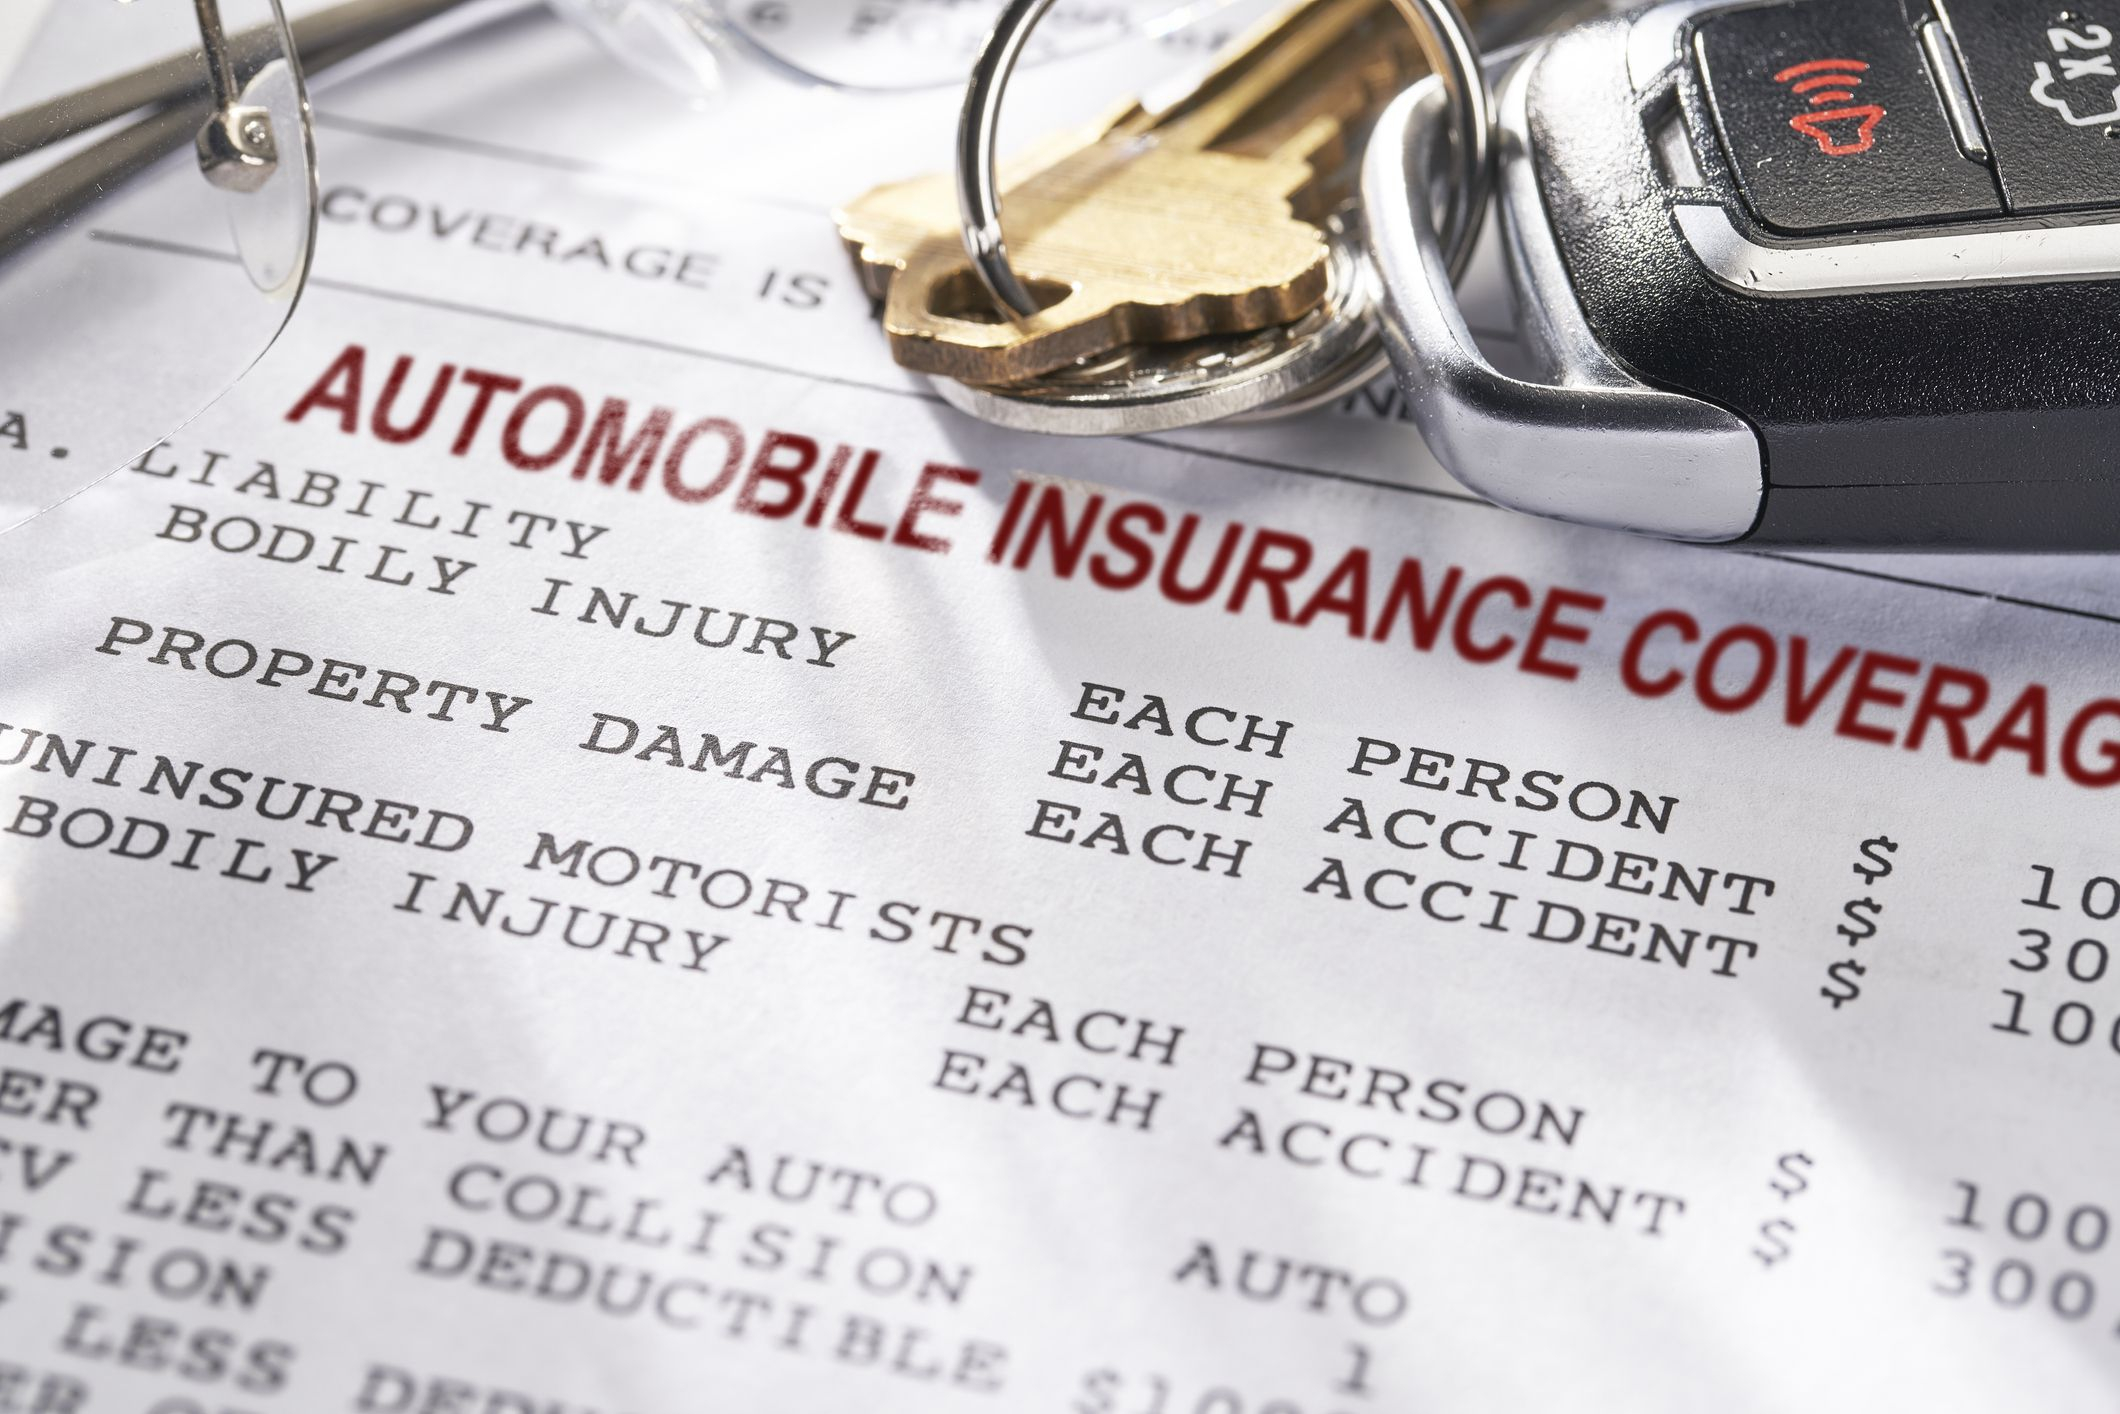 15 Tips And Ideas For Cutting Car Insurance Costs in dimensions 2120 X 1414